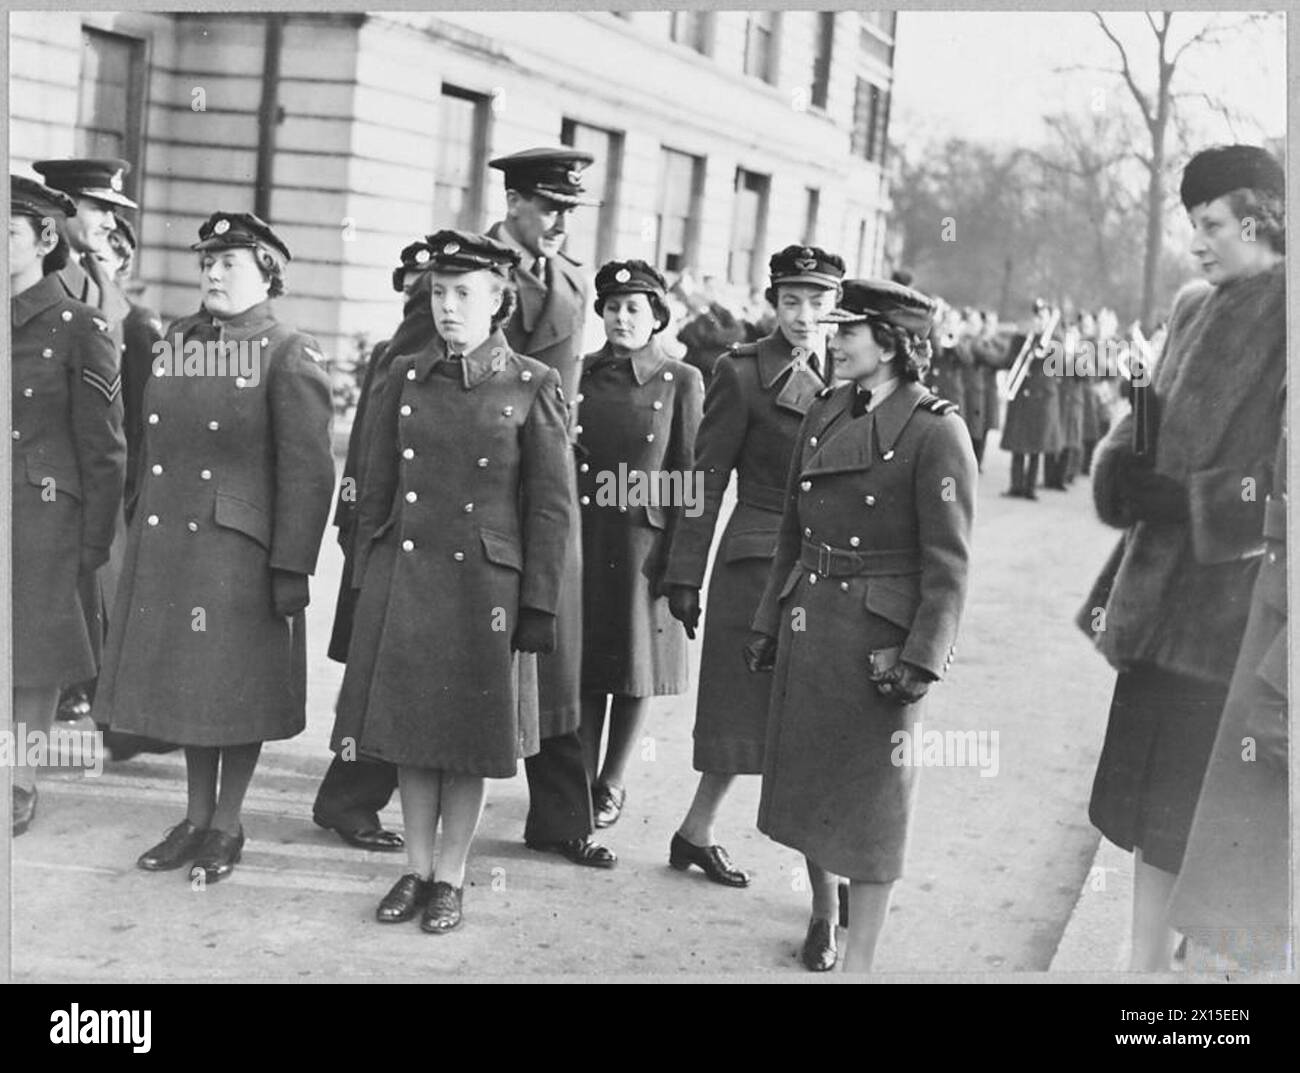 DUCHESS OF GLOUCESTER AT AIR CREW RECEPTION CENTRE - 11980 Picture (issued 1944) shows - The Duchess of Gloucester inspecting W.A.A.F. at the Depot. Air Vice marshal G.R.M. Reid [extreme left]. Group Captain A.H.H. Gilligan [Commanding Officer] and Section Officer C. Thorn accompanied her Royal Air Force Stock Photo